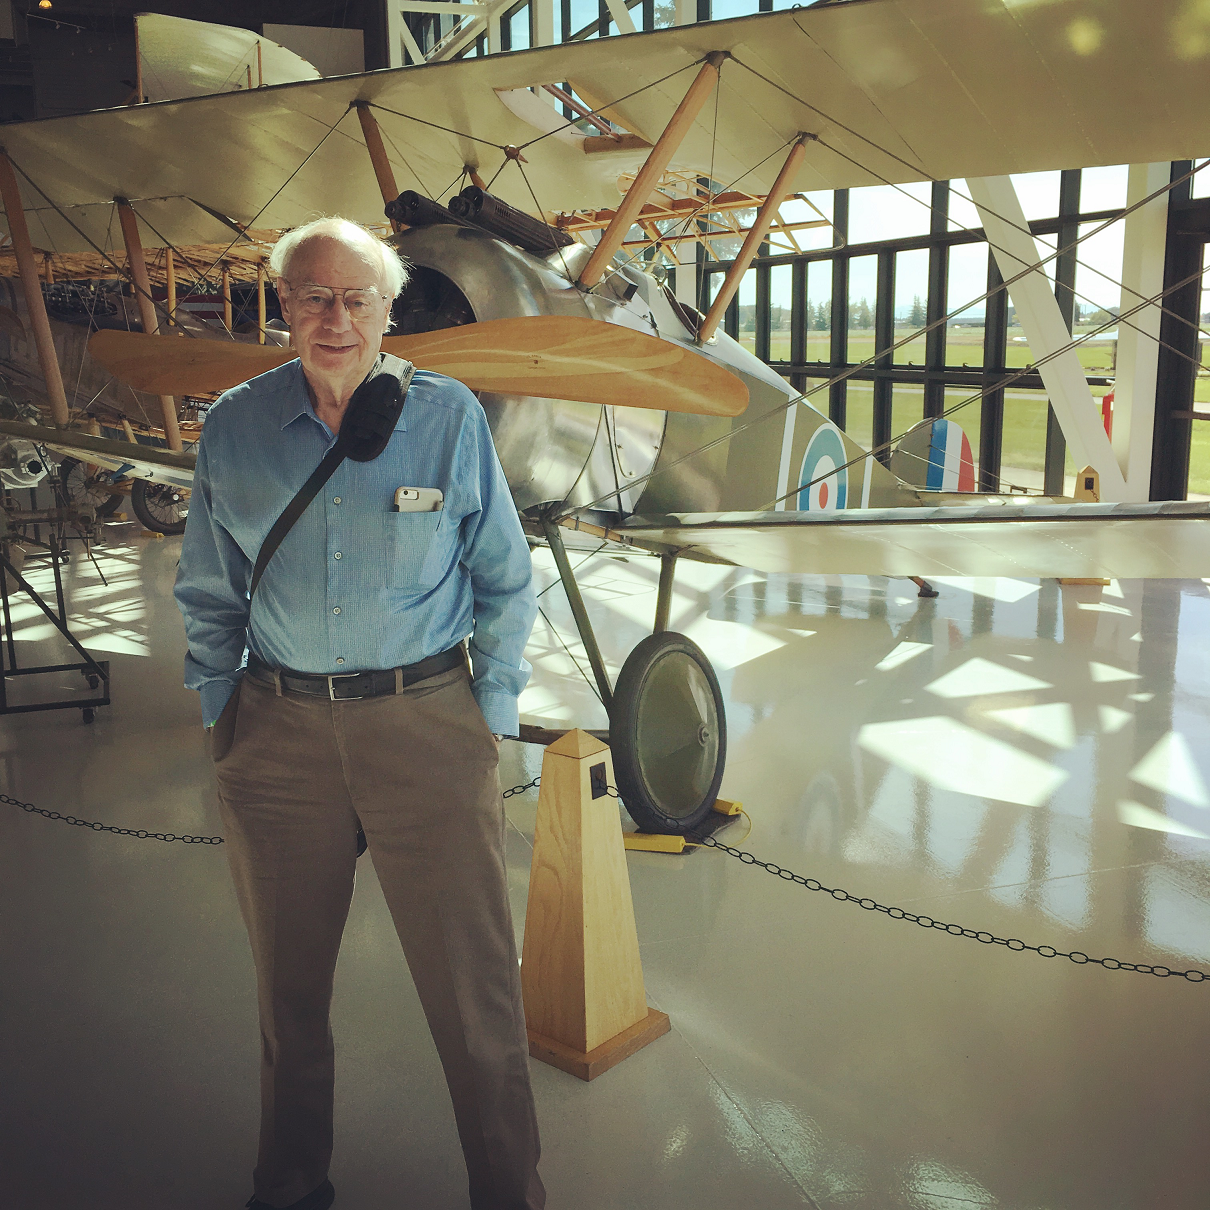 John in front of the type of airplane his father flew